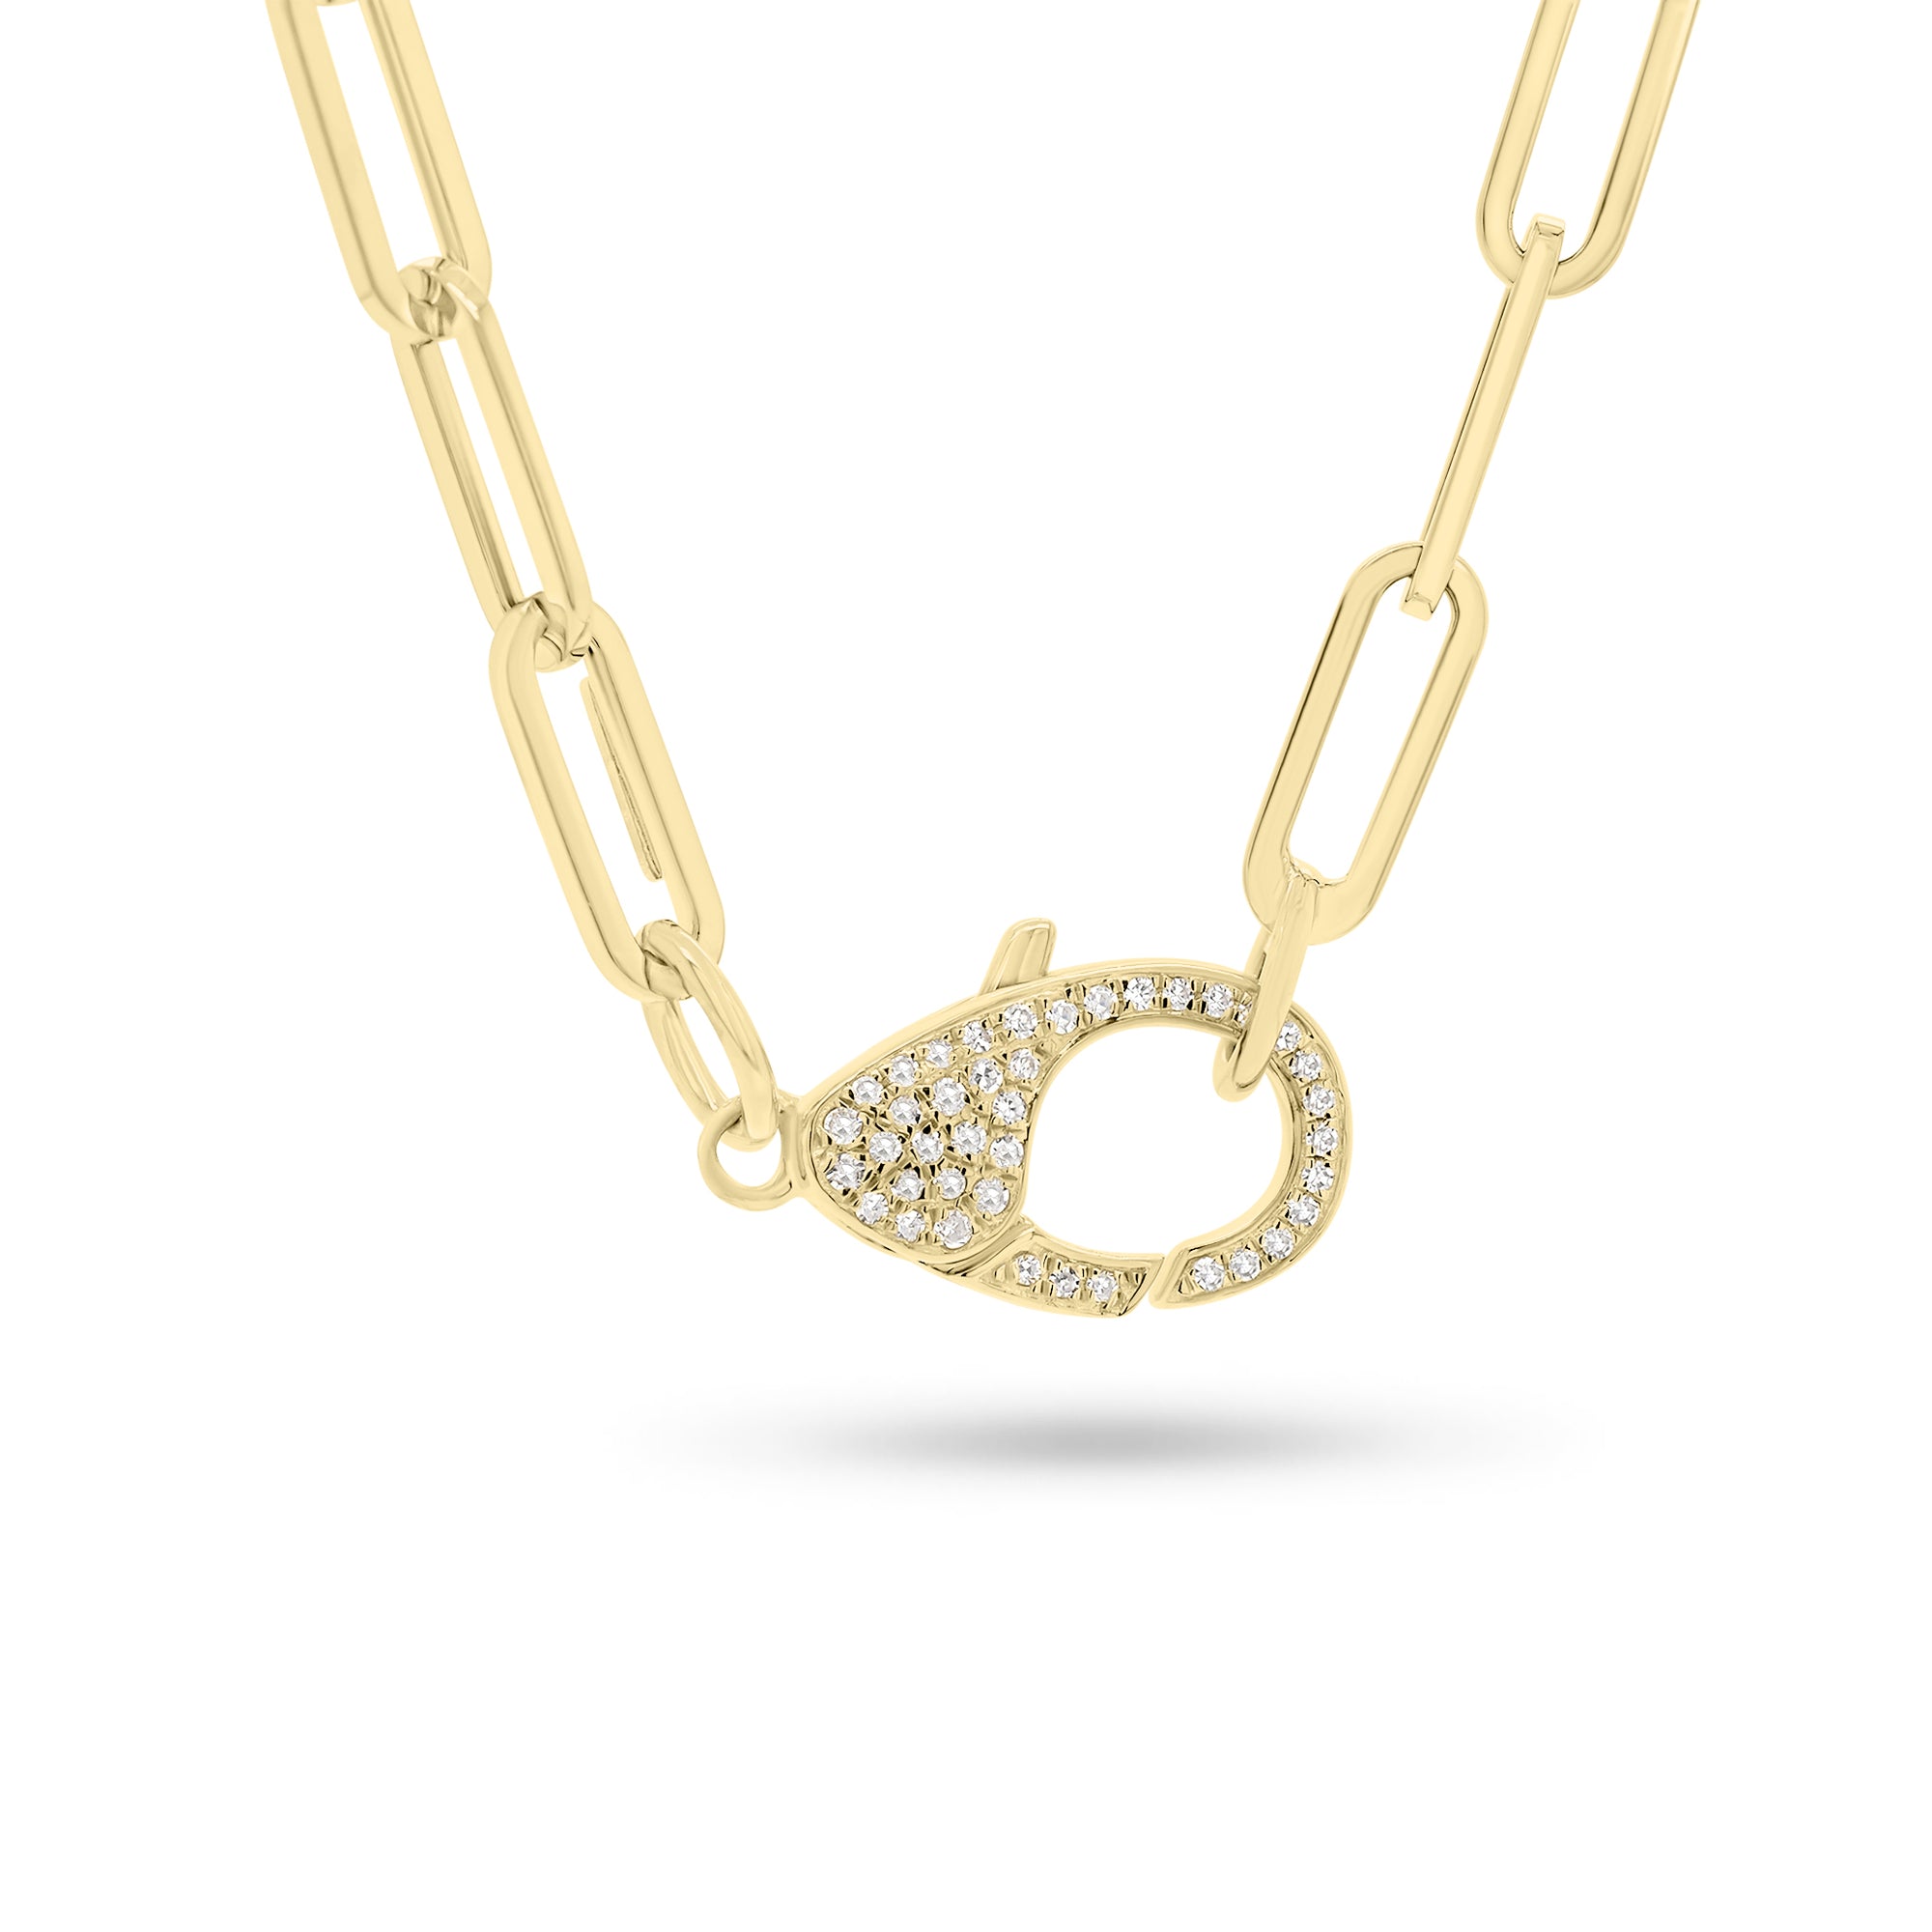 Pave Diamond Oversized Clasp Pendant Necklace - 14K yellow gold weighing 1.36 grams  - 80 round diamonds weighing 0.20 carats.